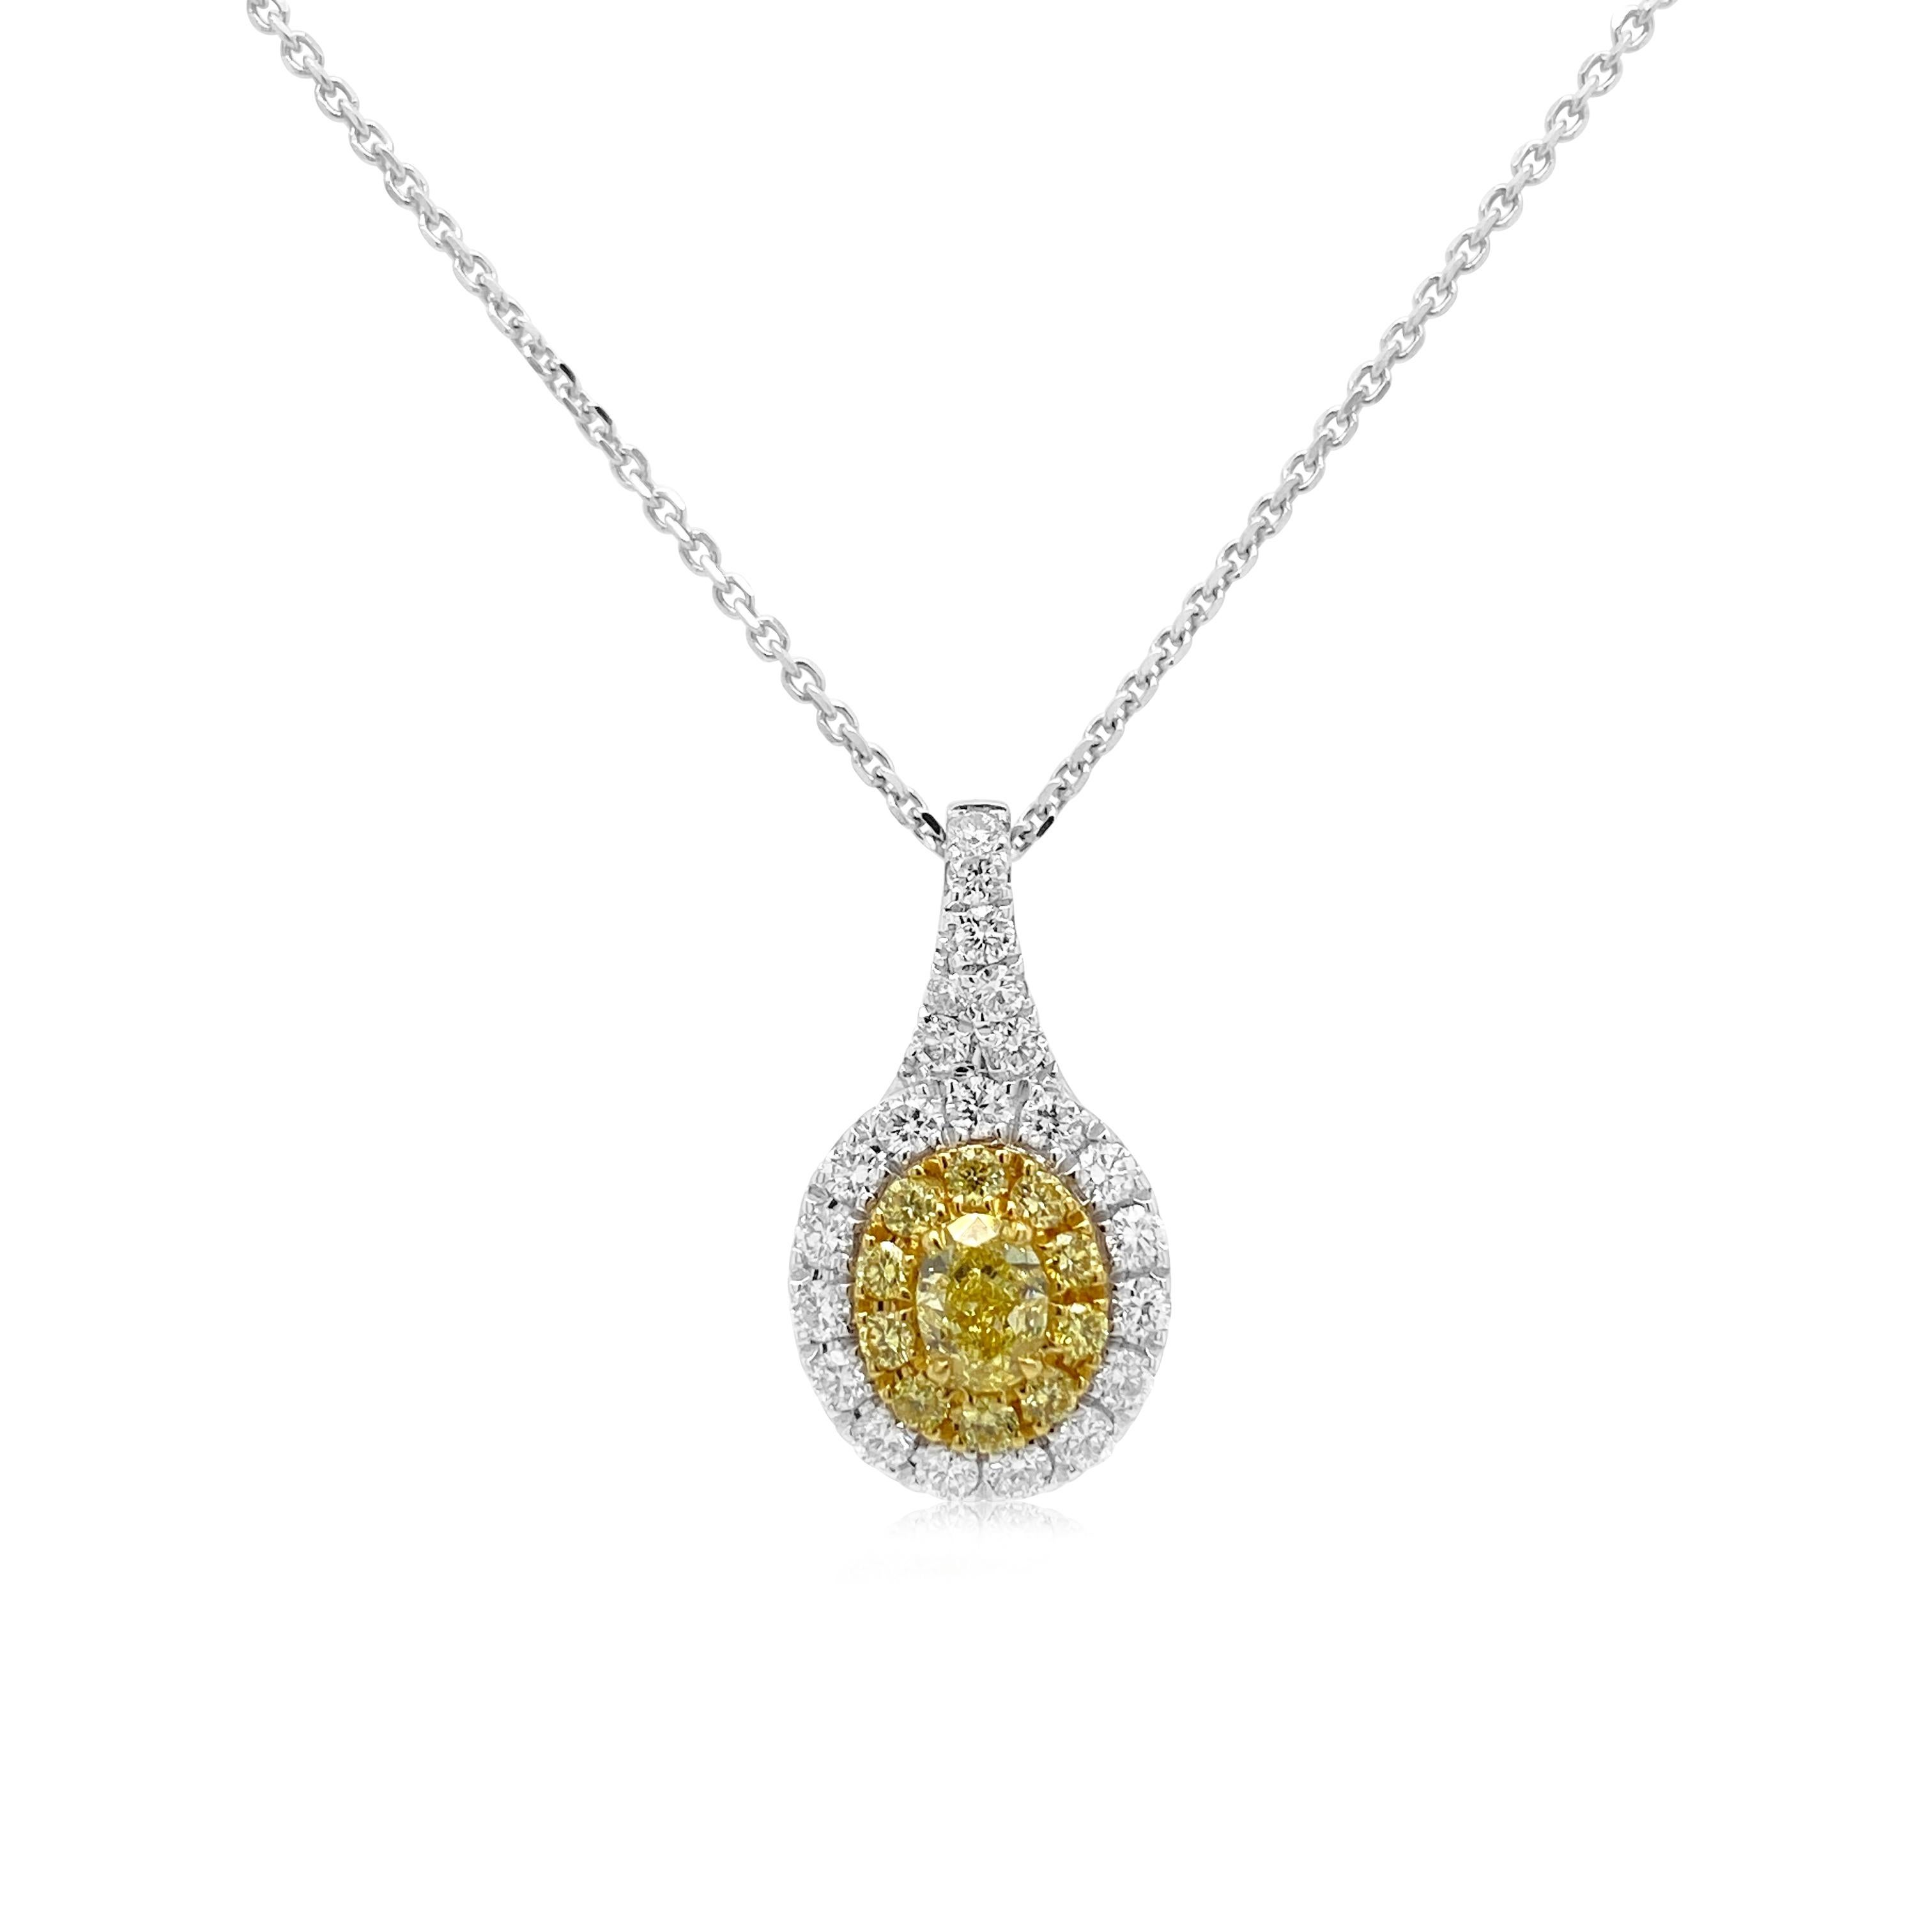 This elegant yellow diamond pendant is set in white and yellow gold surrounded with round brilliant cut yellow and white diamonds. The intense yellow diamond has a beautiful lustre and finish and makes for a fine luxury jewellery piece.


-	Centre